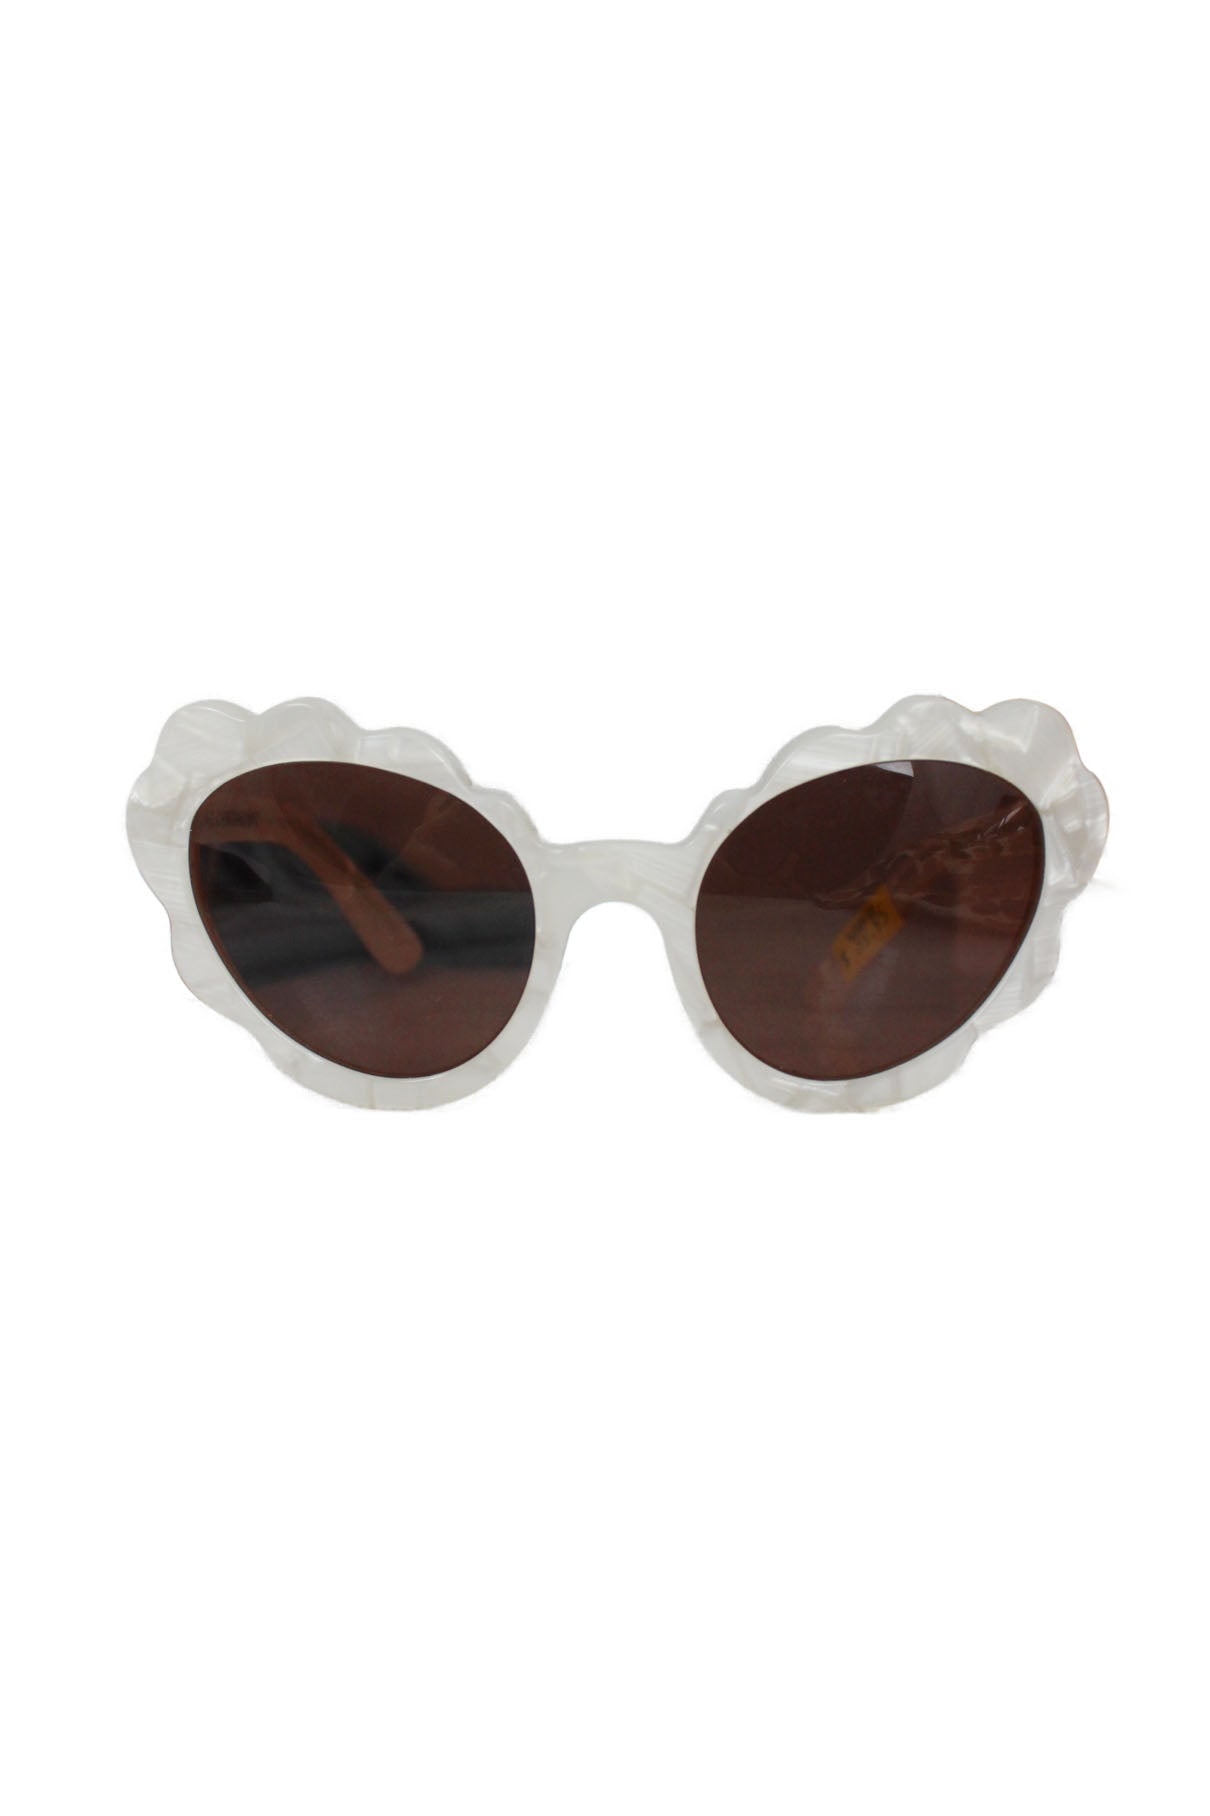  opening ceremony white sunglasses. features scalloped trim, cat eye silhouette, dark orange tint, and white marbled acrylic texture. 